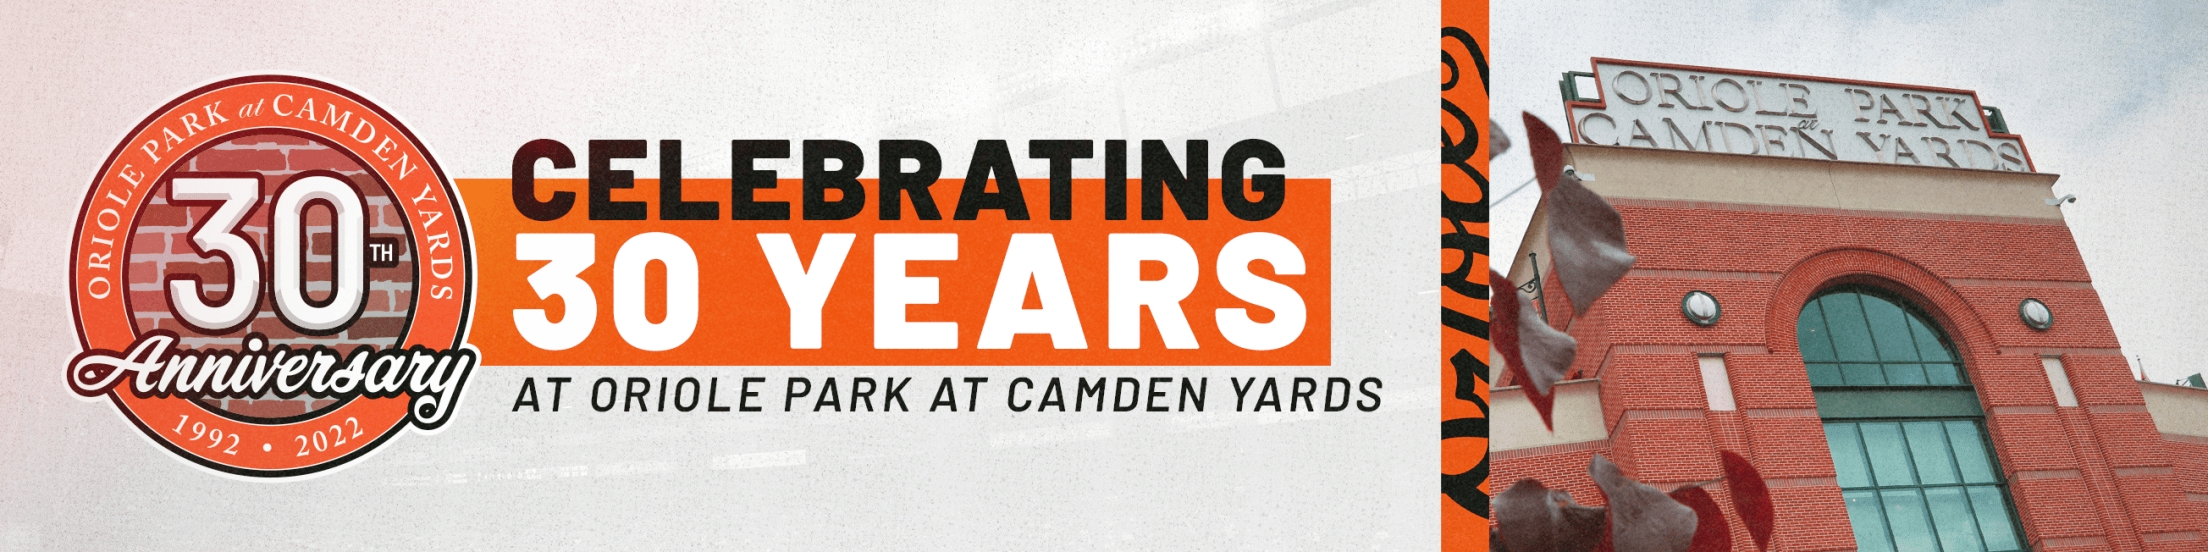 Orioles announce Camden Yards 30th anniversary weekend